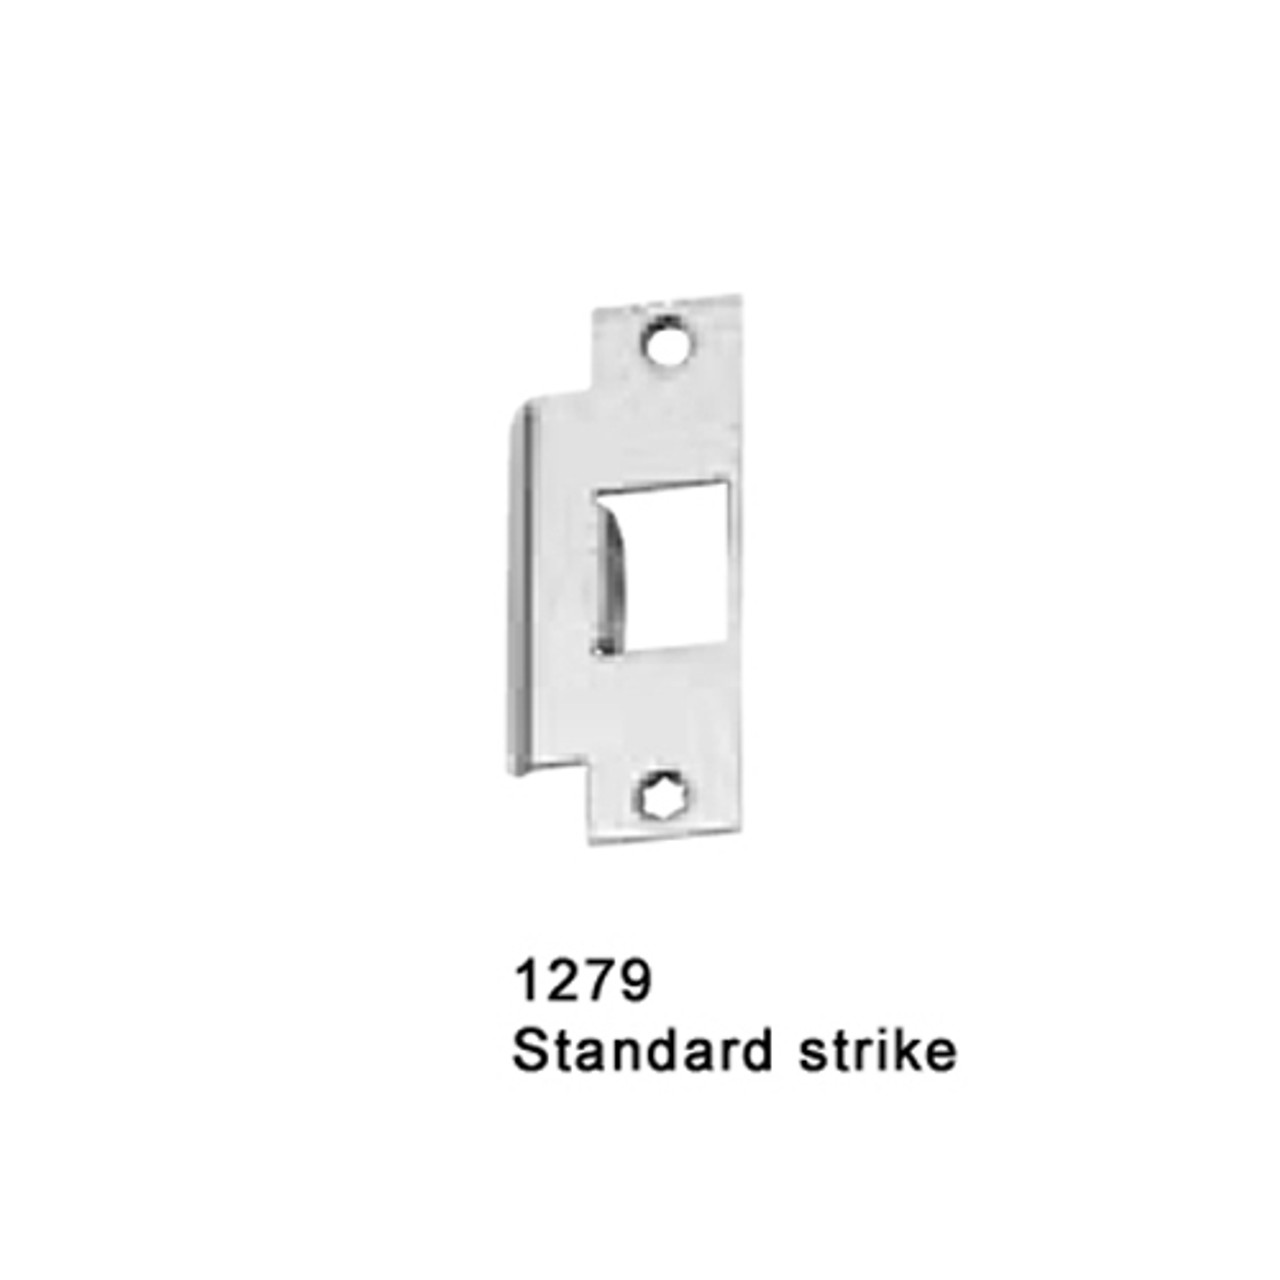 CD25-M-L-BE-DANE-US28-4-LHR Falcon 25 Series Mortise Lock Devices 510L-BE Dane Lever Trim with Blank Escutcheon in Anodized Aluminum